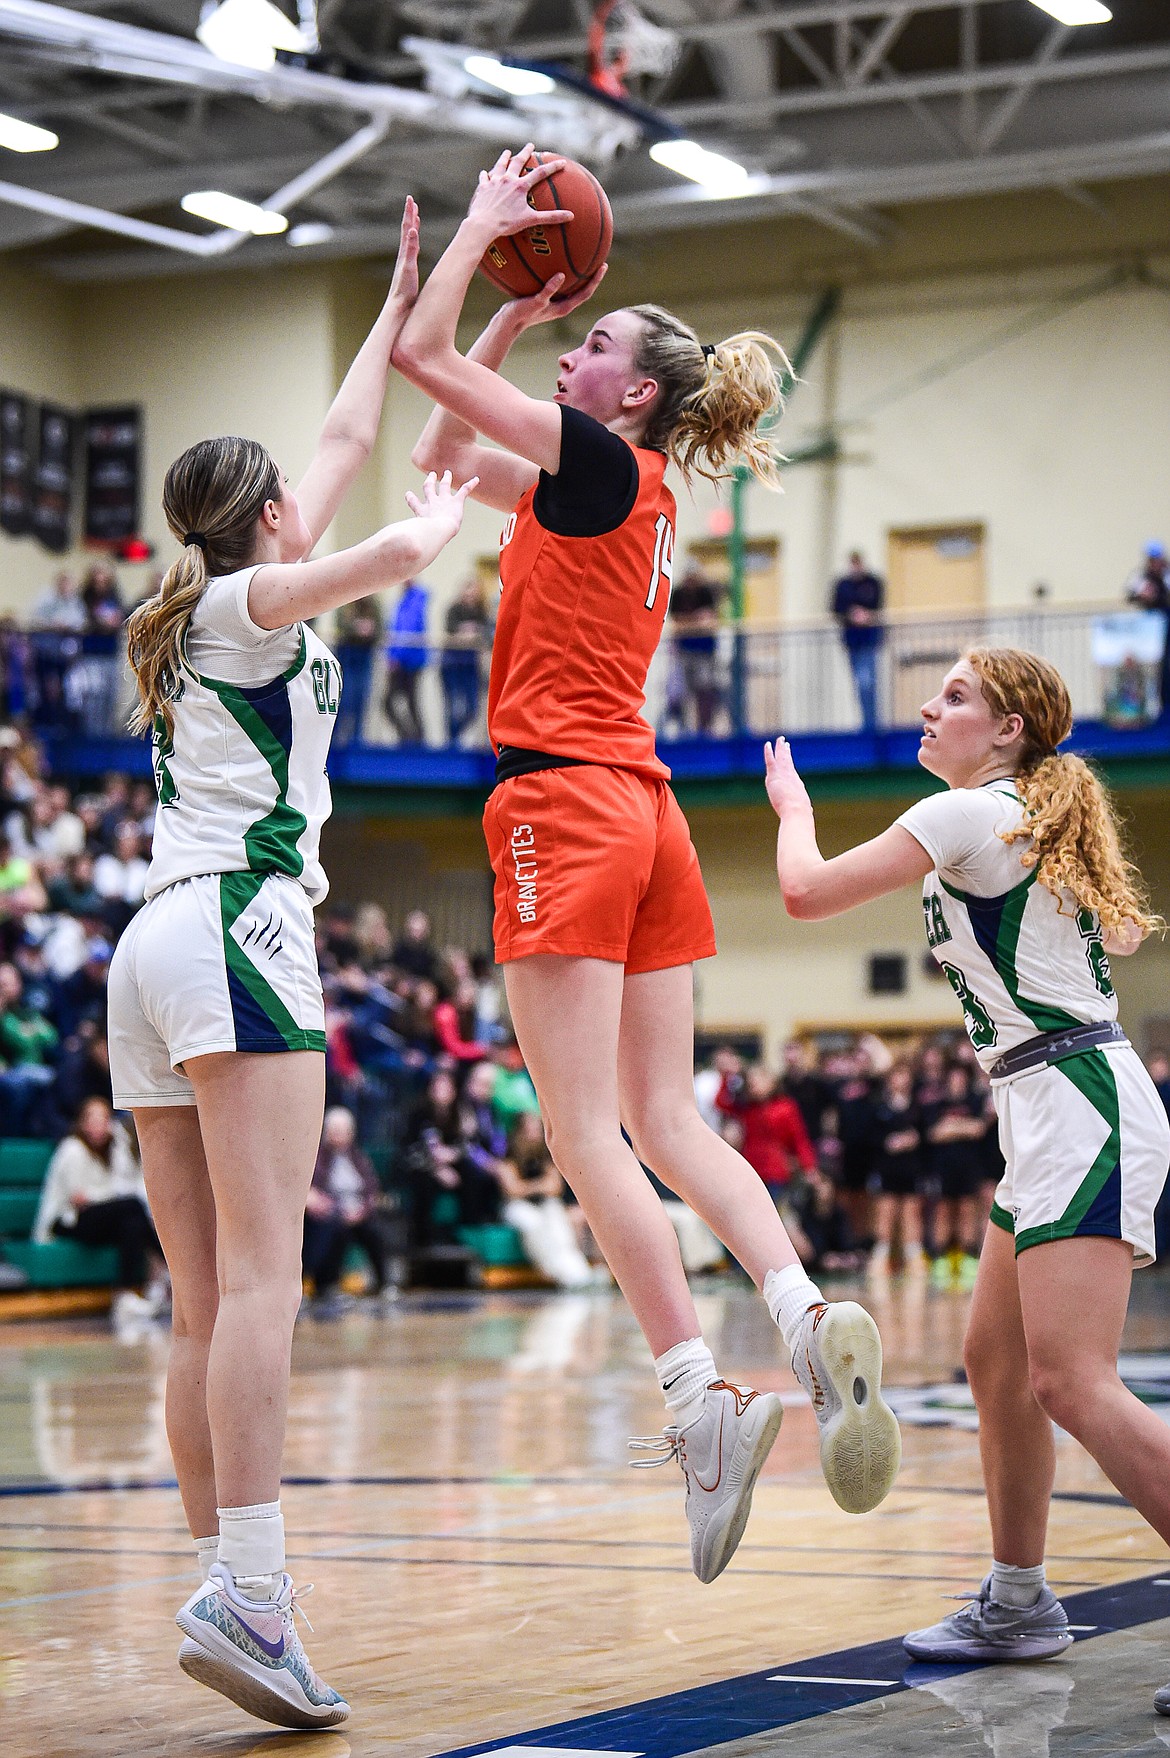 Flathead's Kennedy Moore (14) knocks down a jumper to take the lead late in the fourth quarter against Glacier at Glacier High School on Thursday, Feb. 1. (Casey Kreider/Daily Inter Lake)